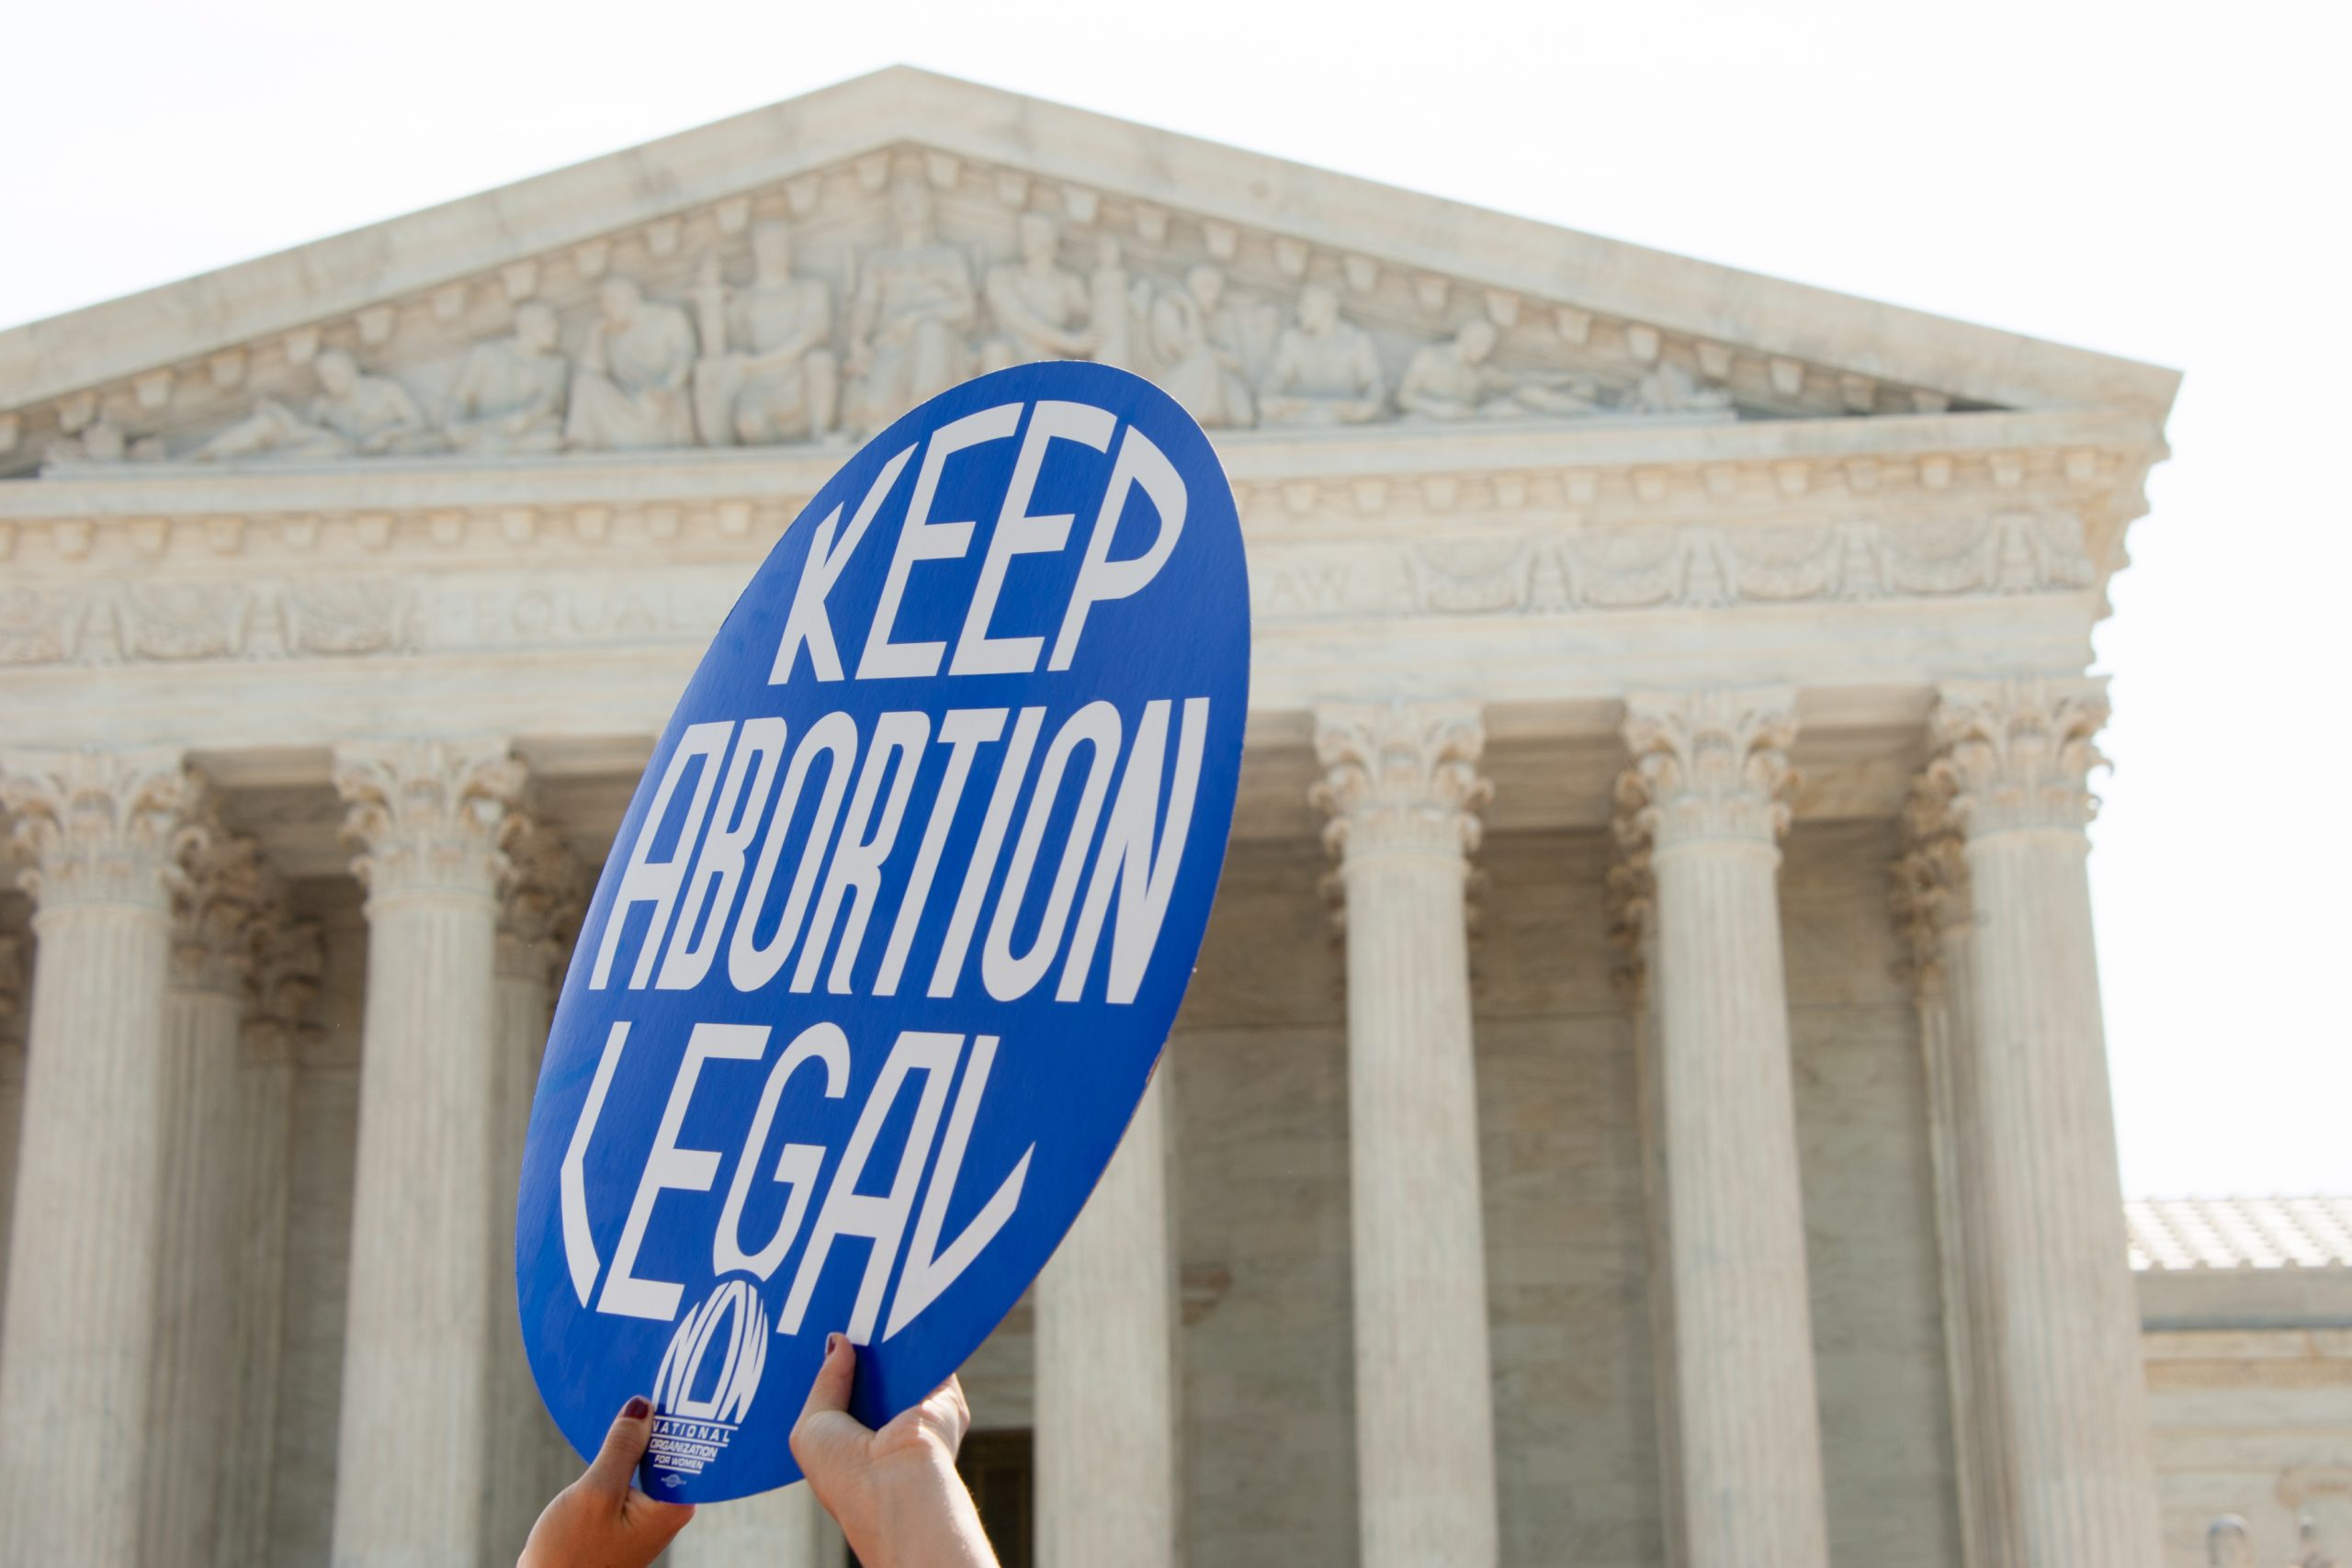 two hands holding round sign reading "Keep Abortion Legal" with Supreme Court building in background